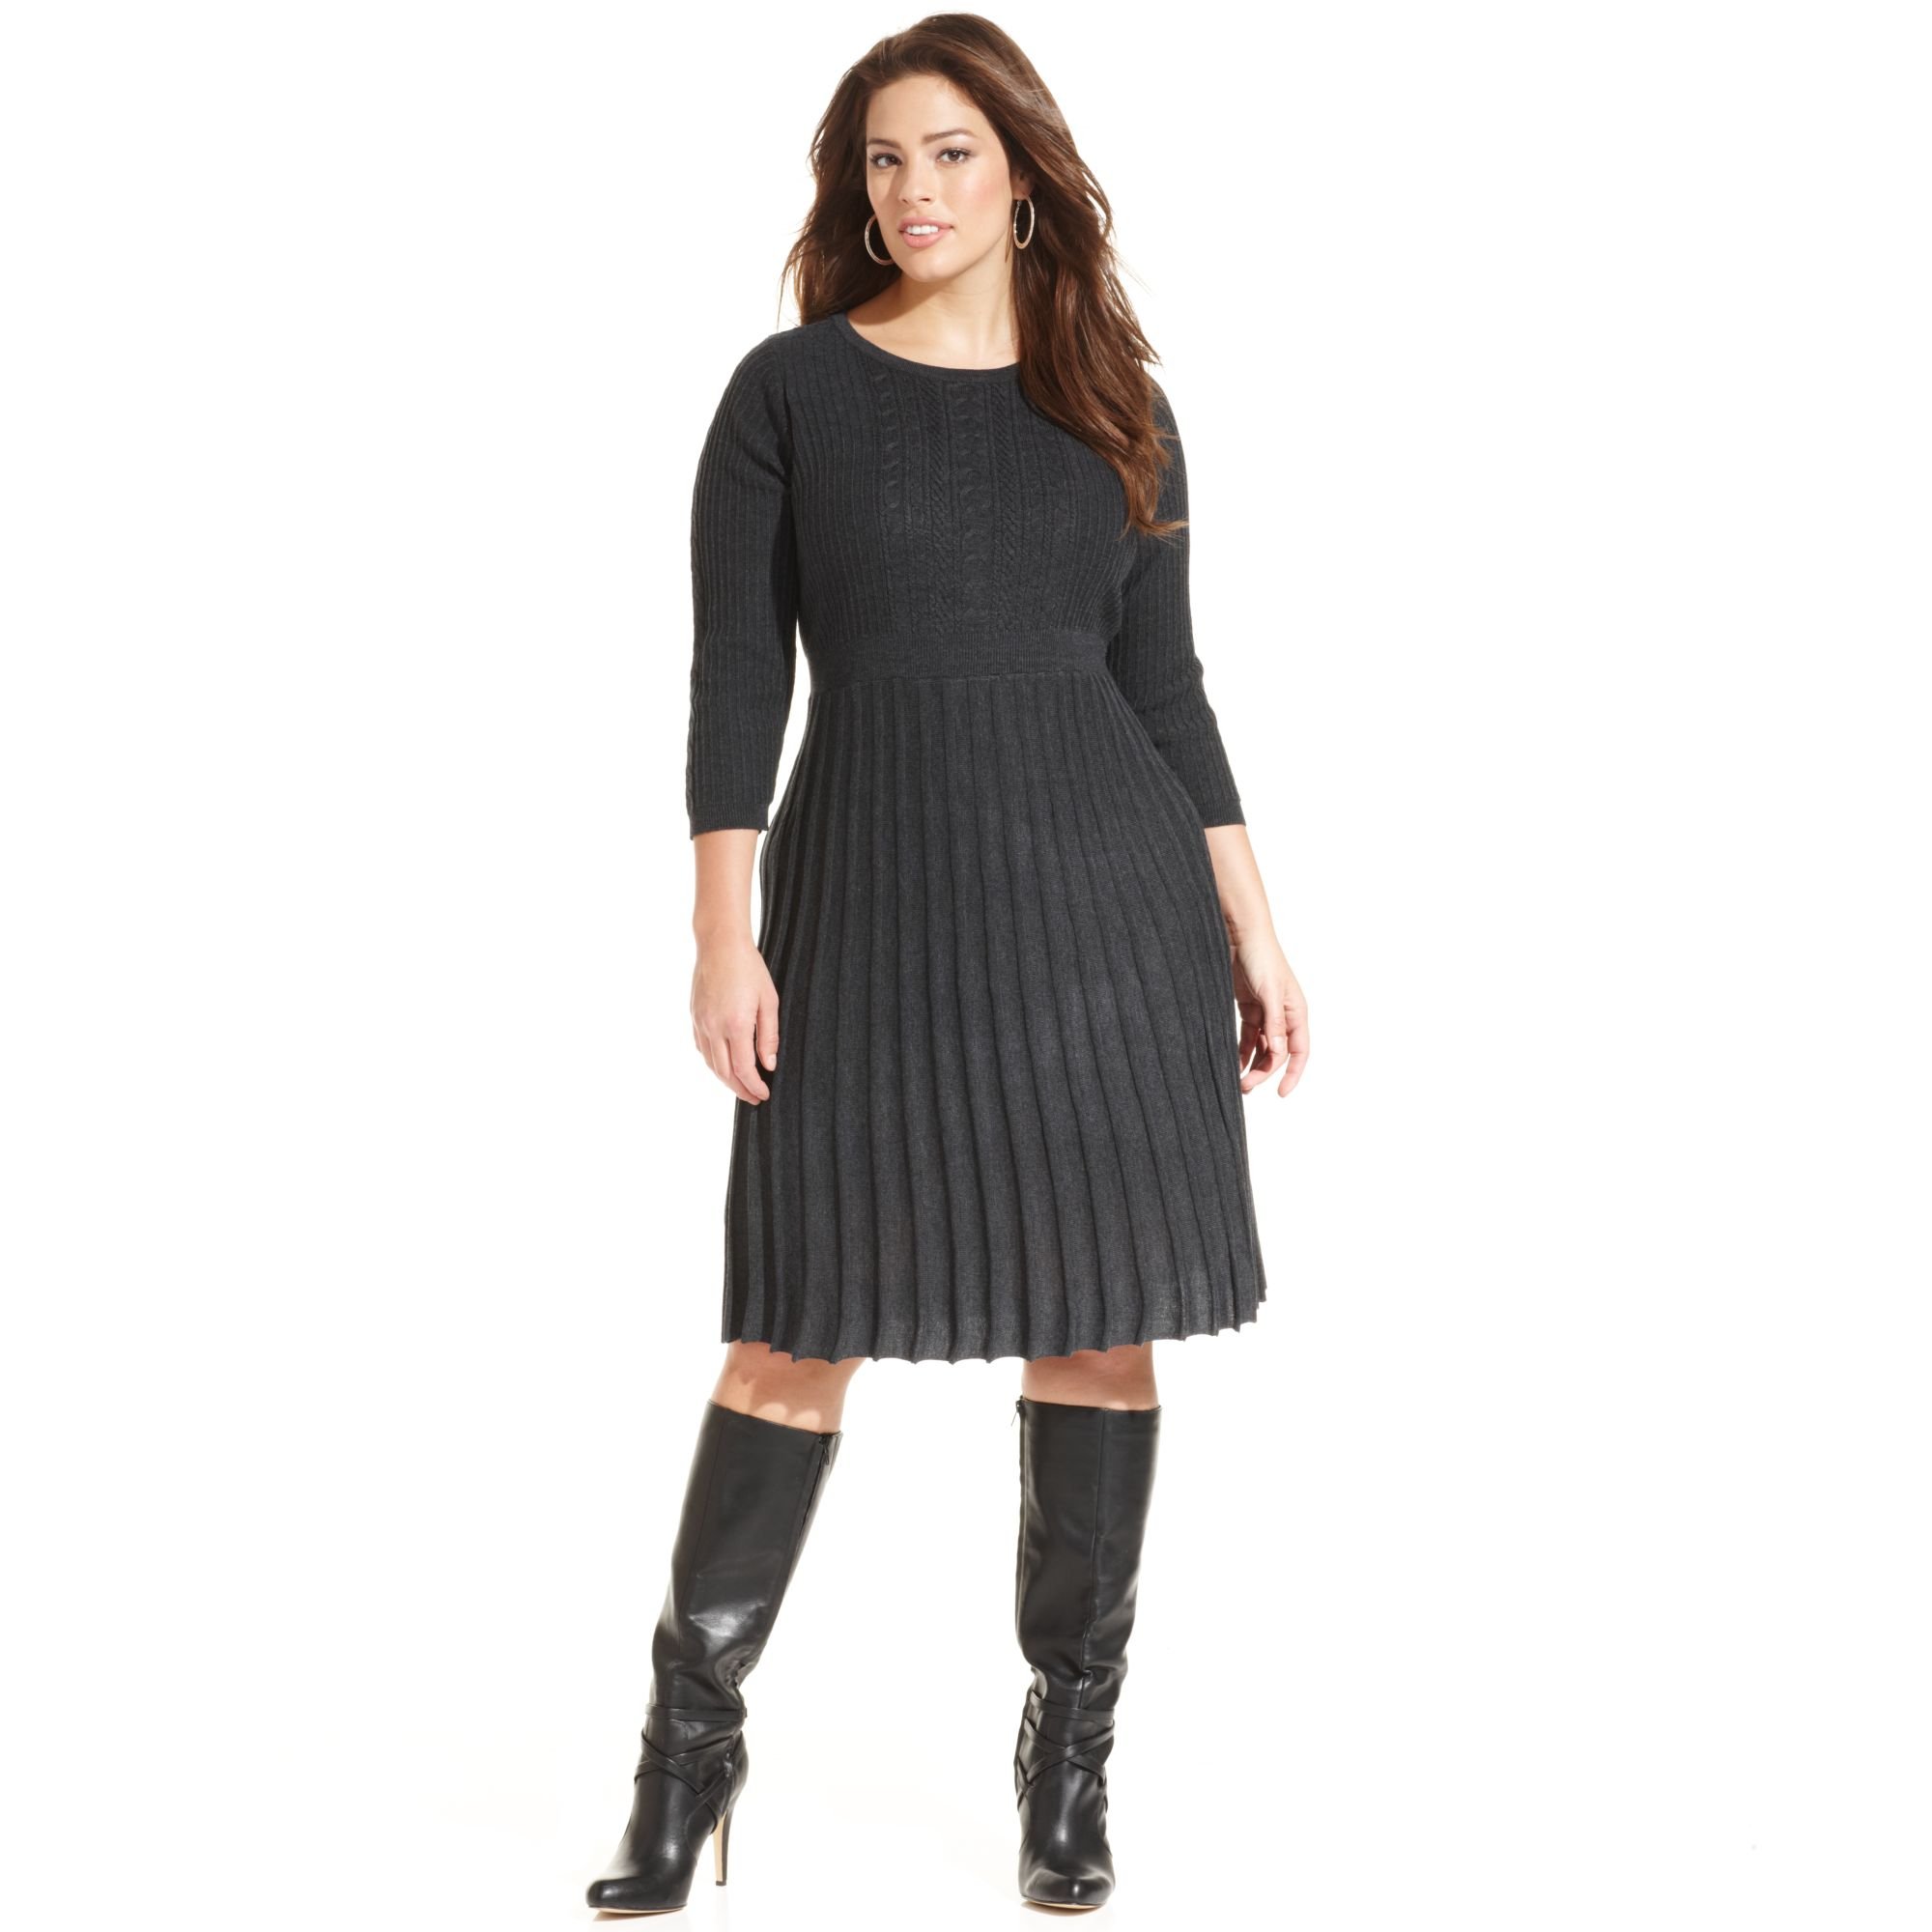 Calvin Klein Pleated Sweater Dress in Charcoal (Black) - Lyst